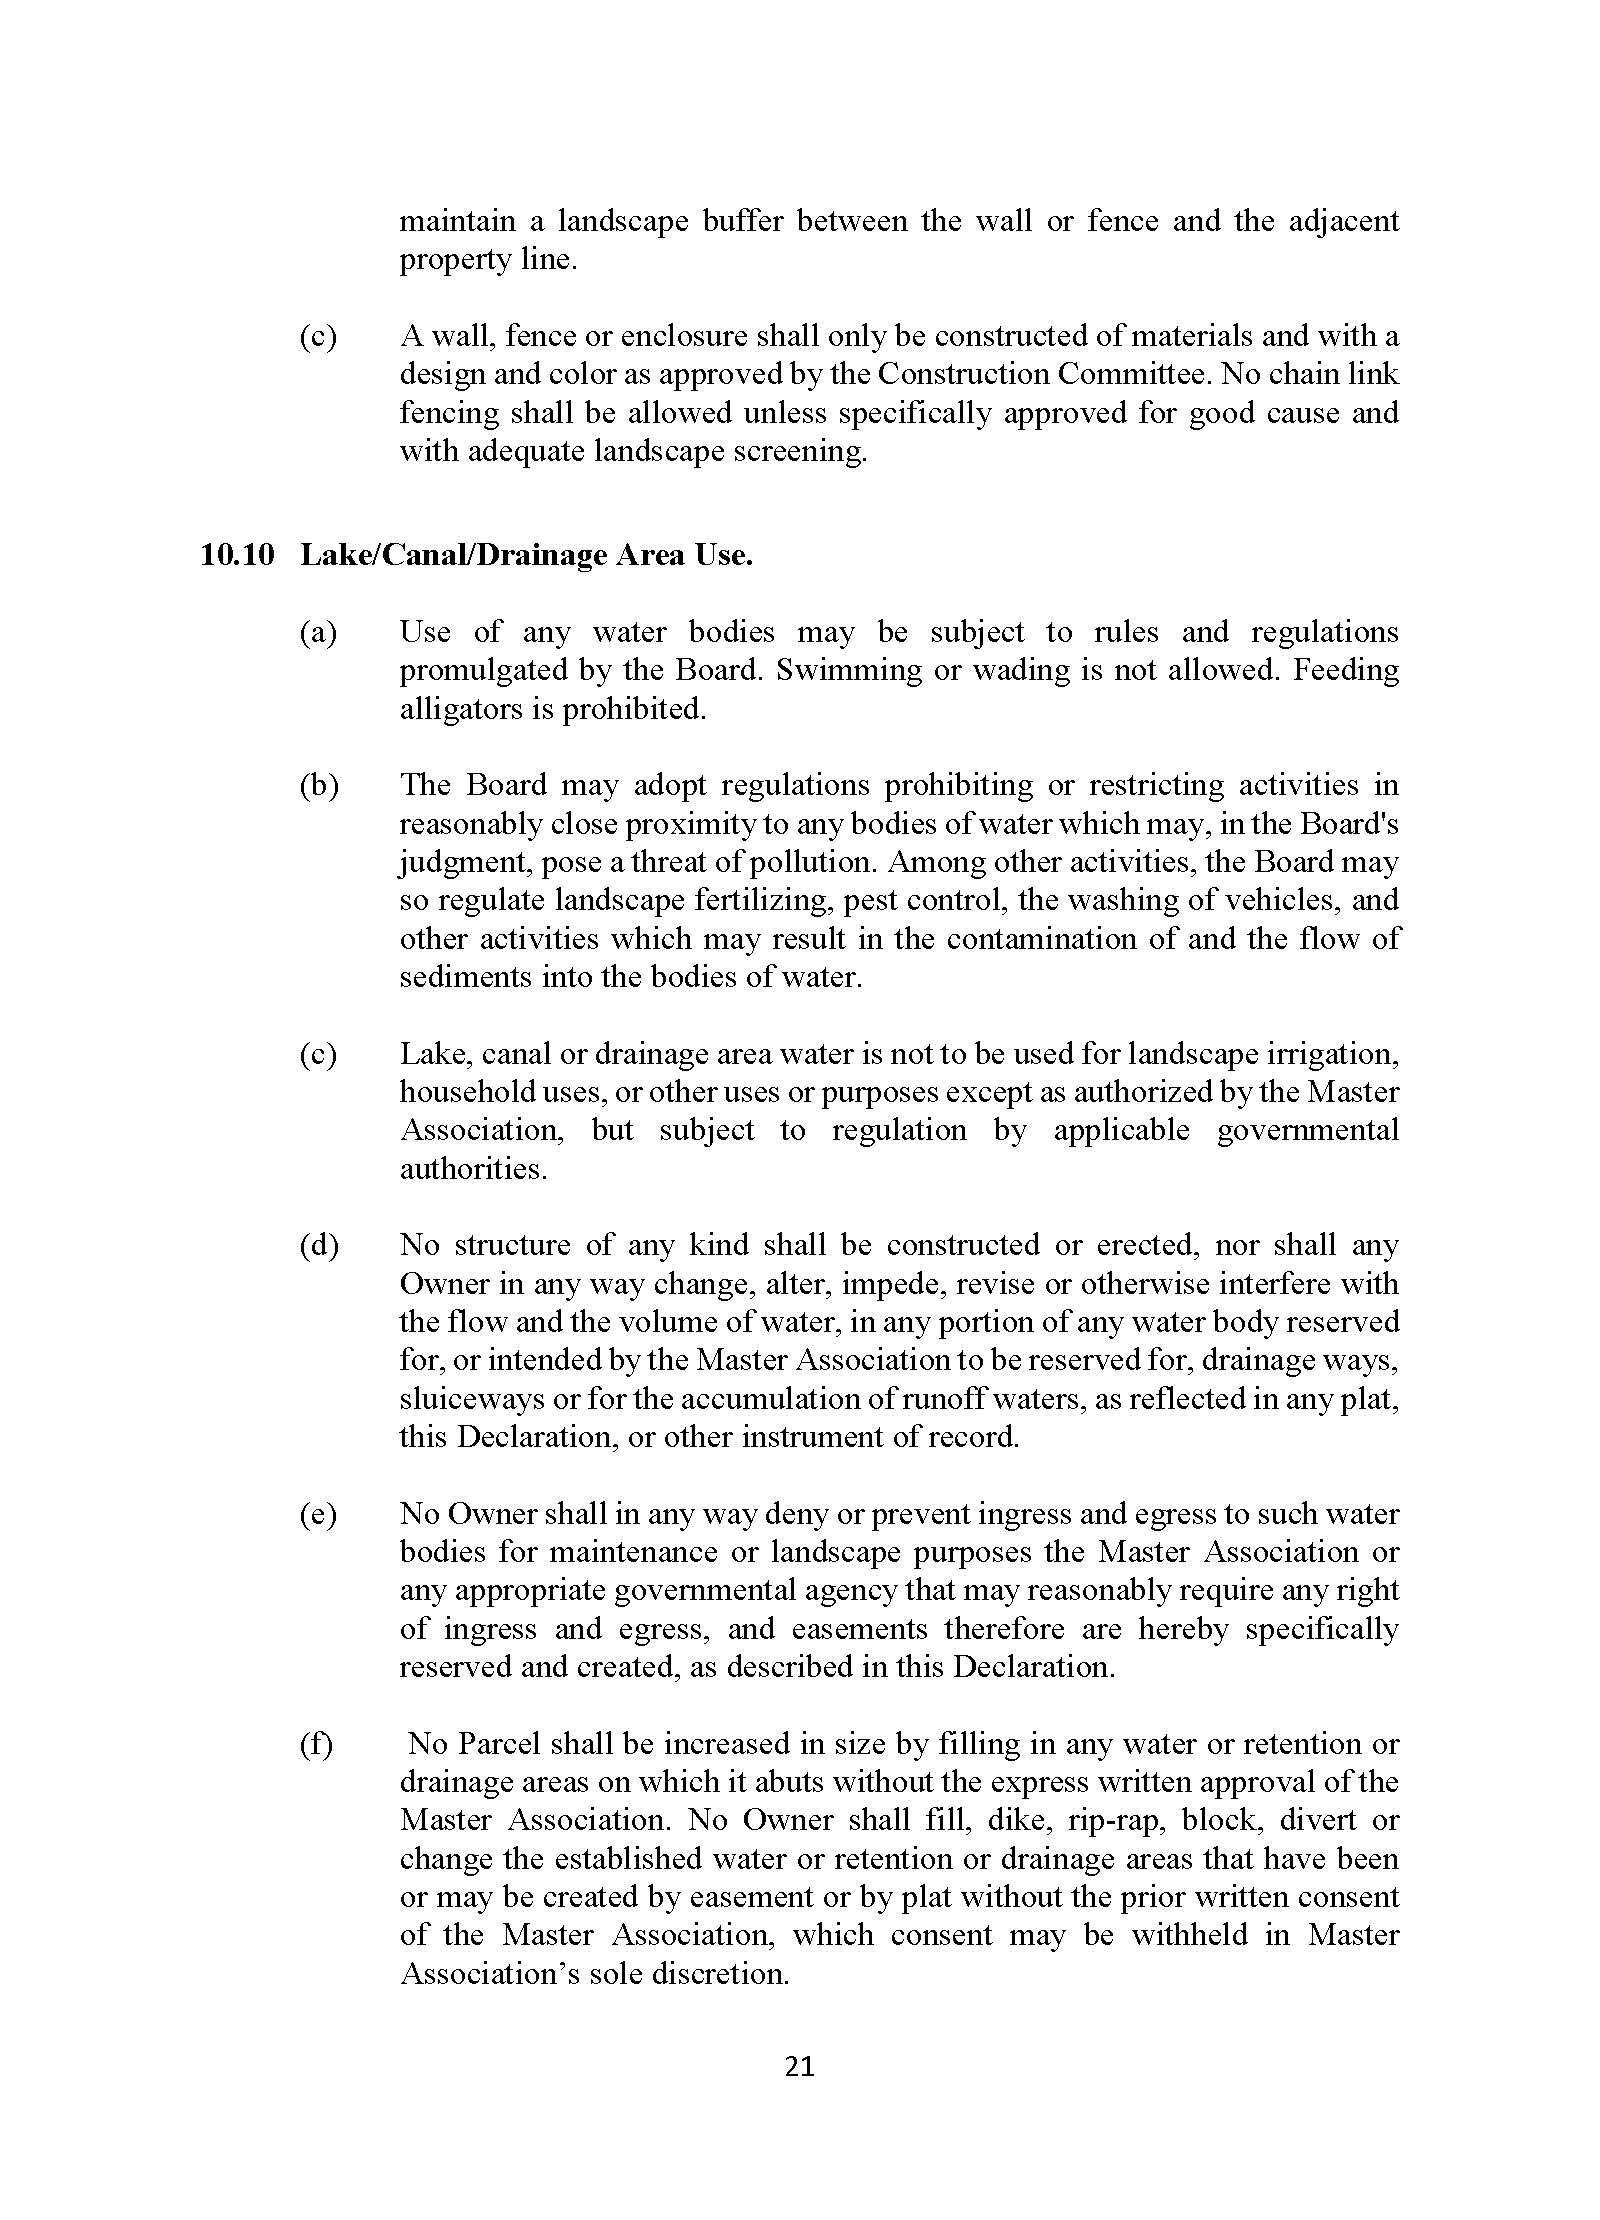 Article 10.X Page 21